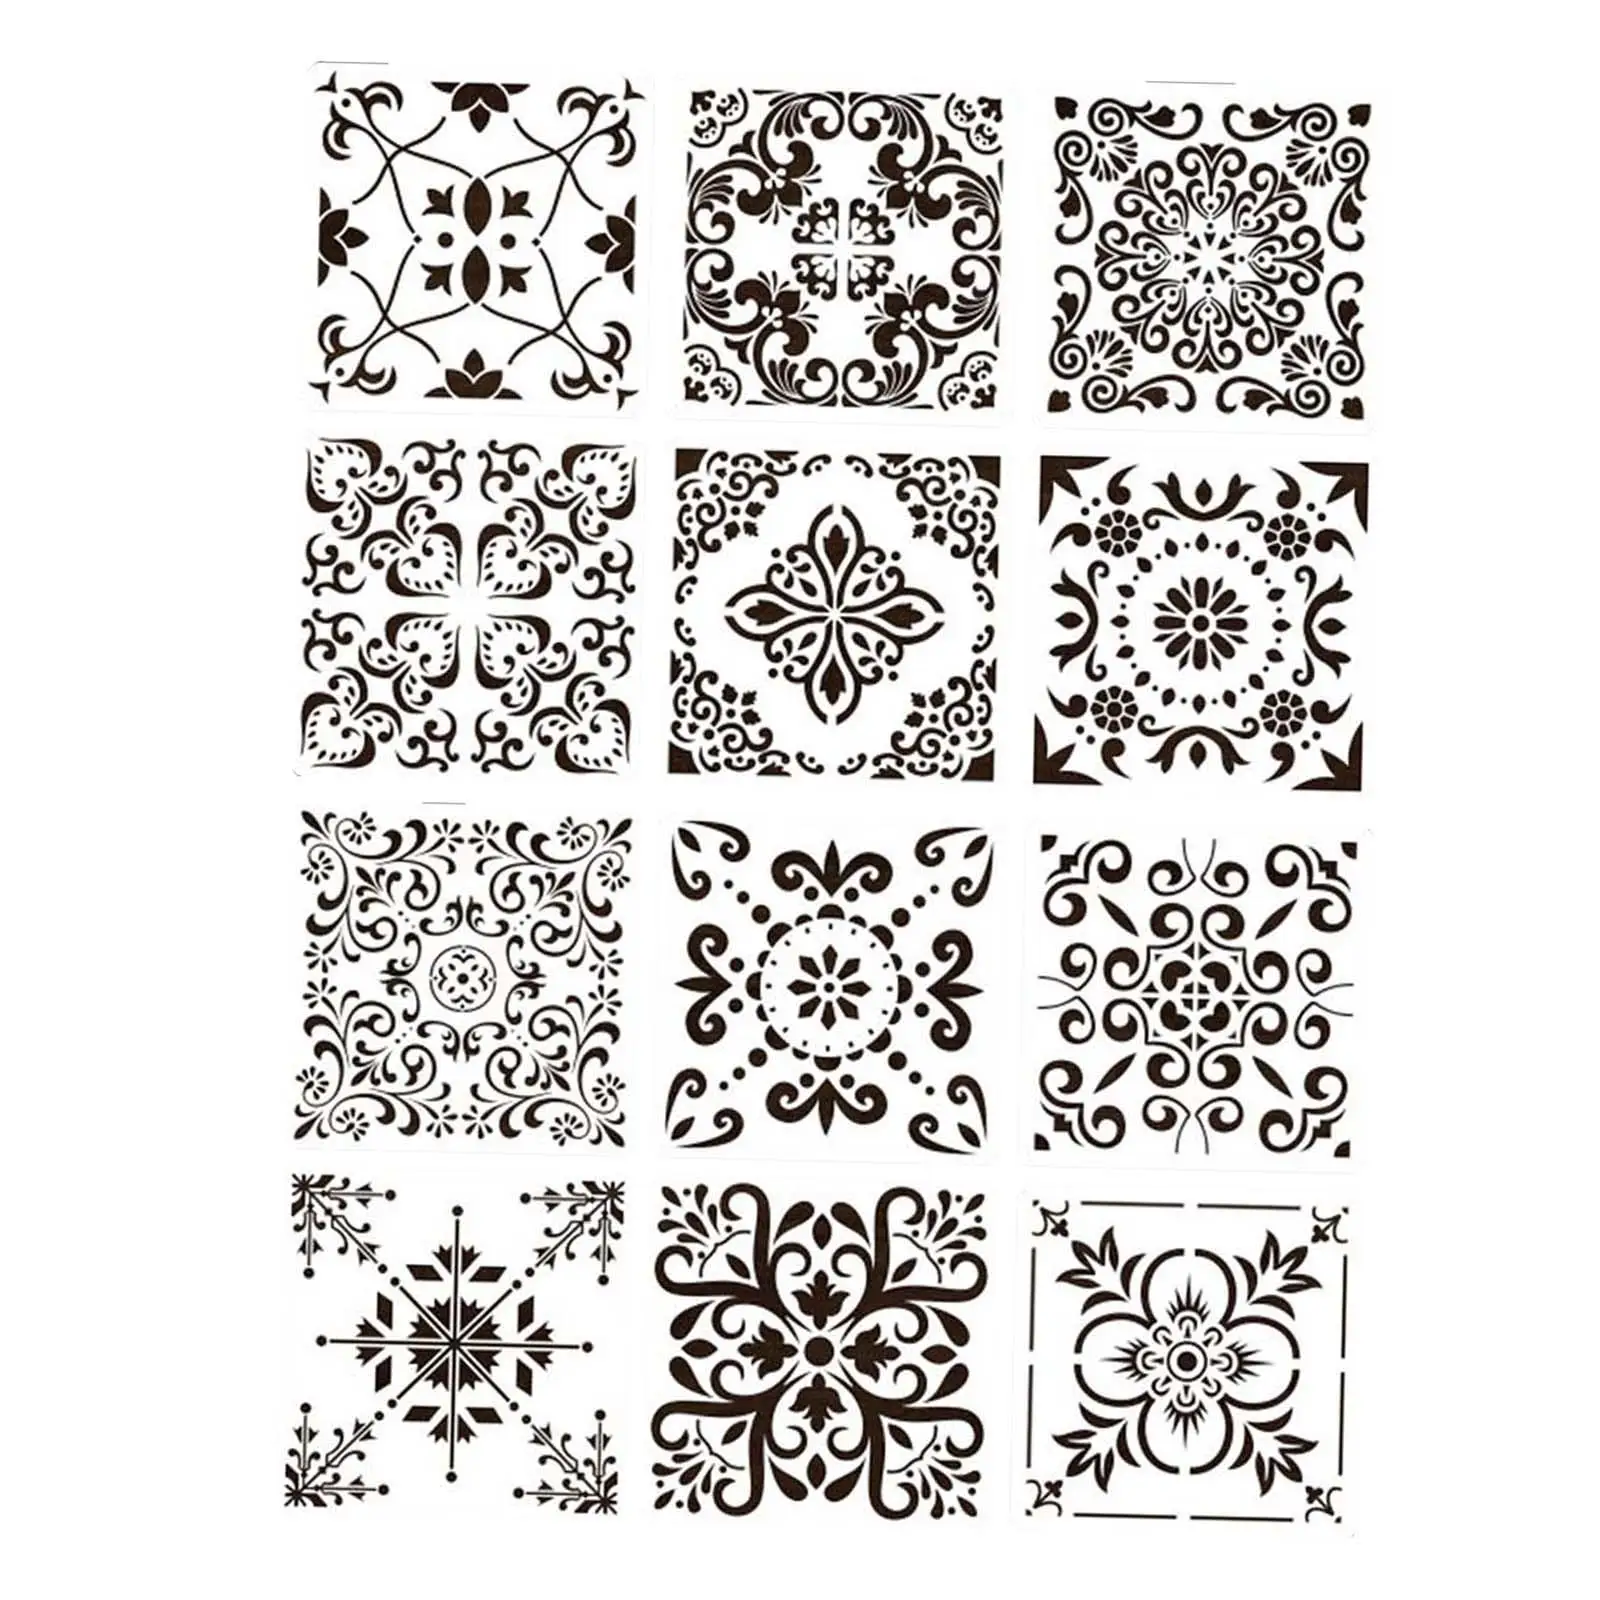 12x Fashion Mandala Stencil Template Reused Art Craft Handmade Drawing Templates for Outdoor Indoor Projects Home Decor